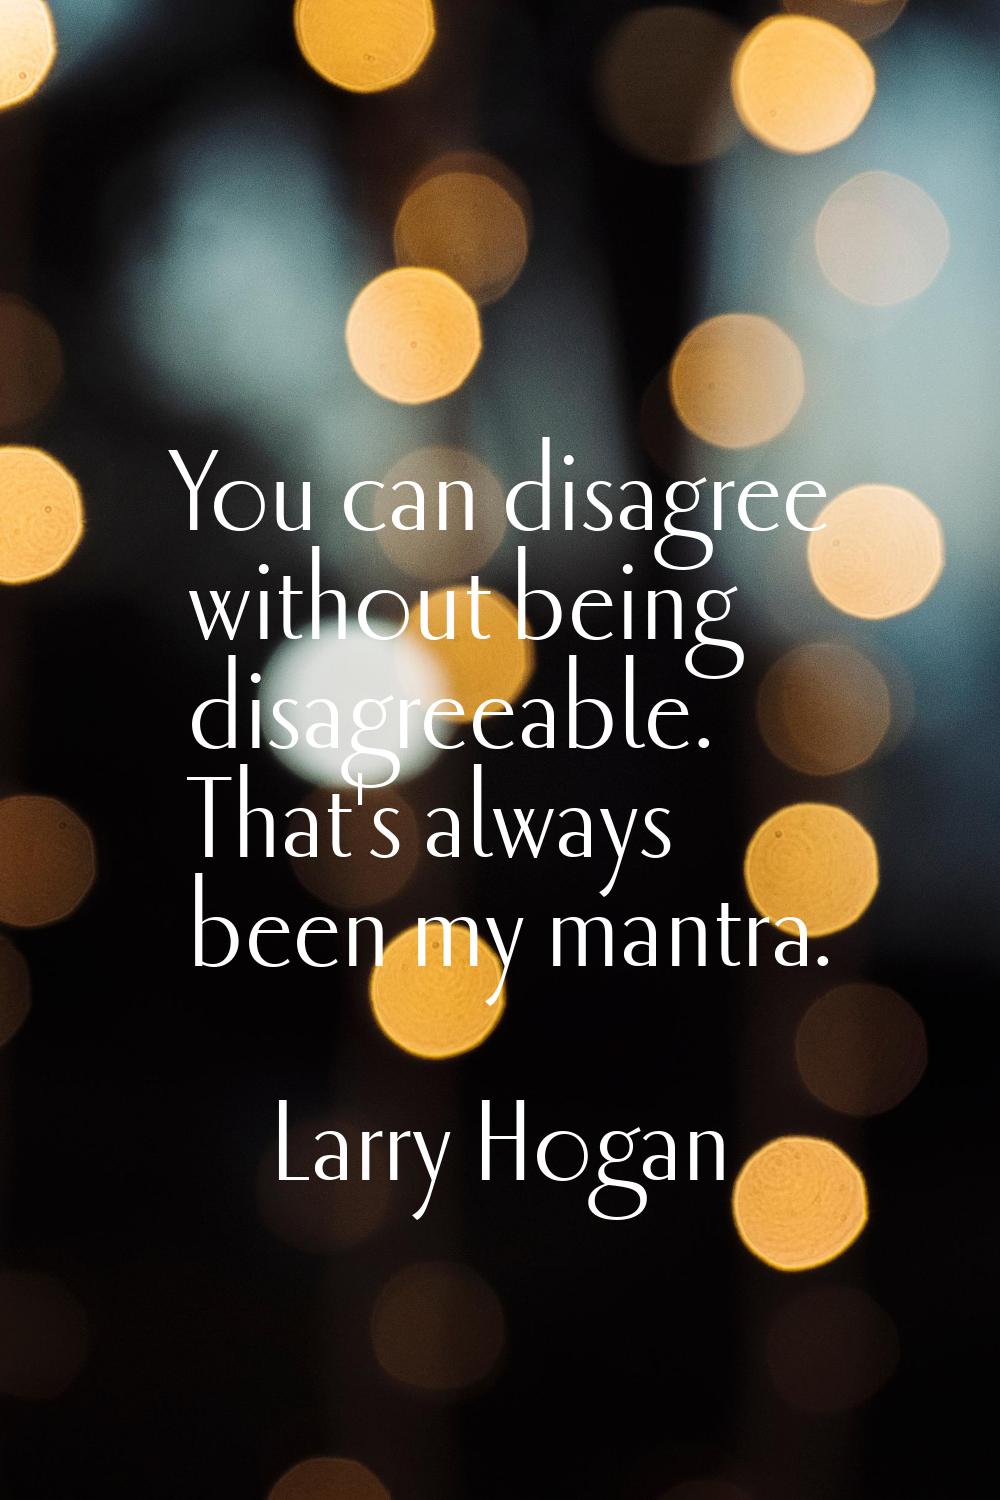 You can disagree without being disagreeable. That's always been my mantra.